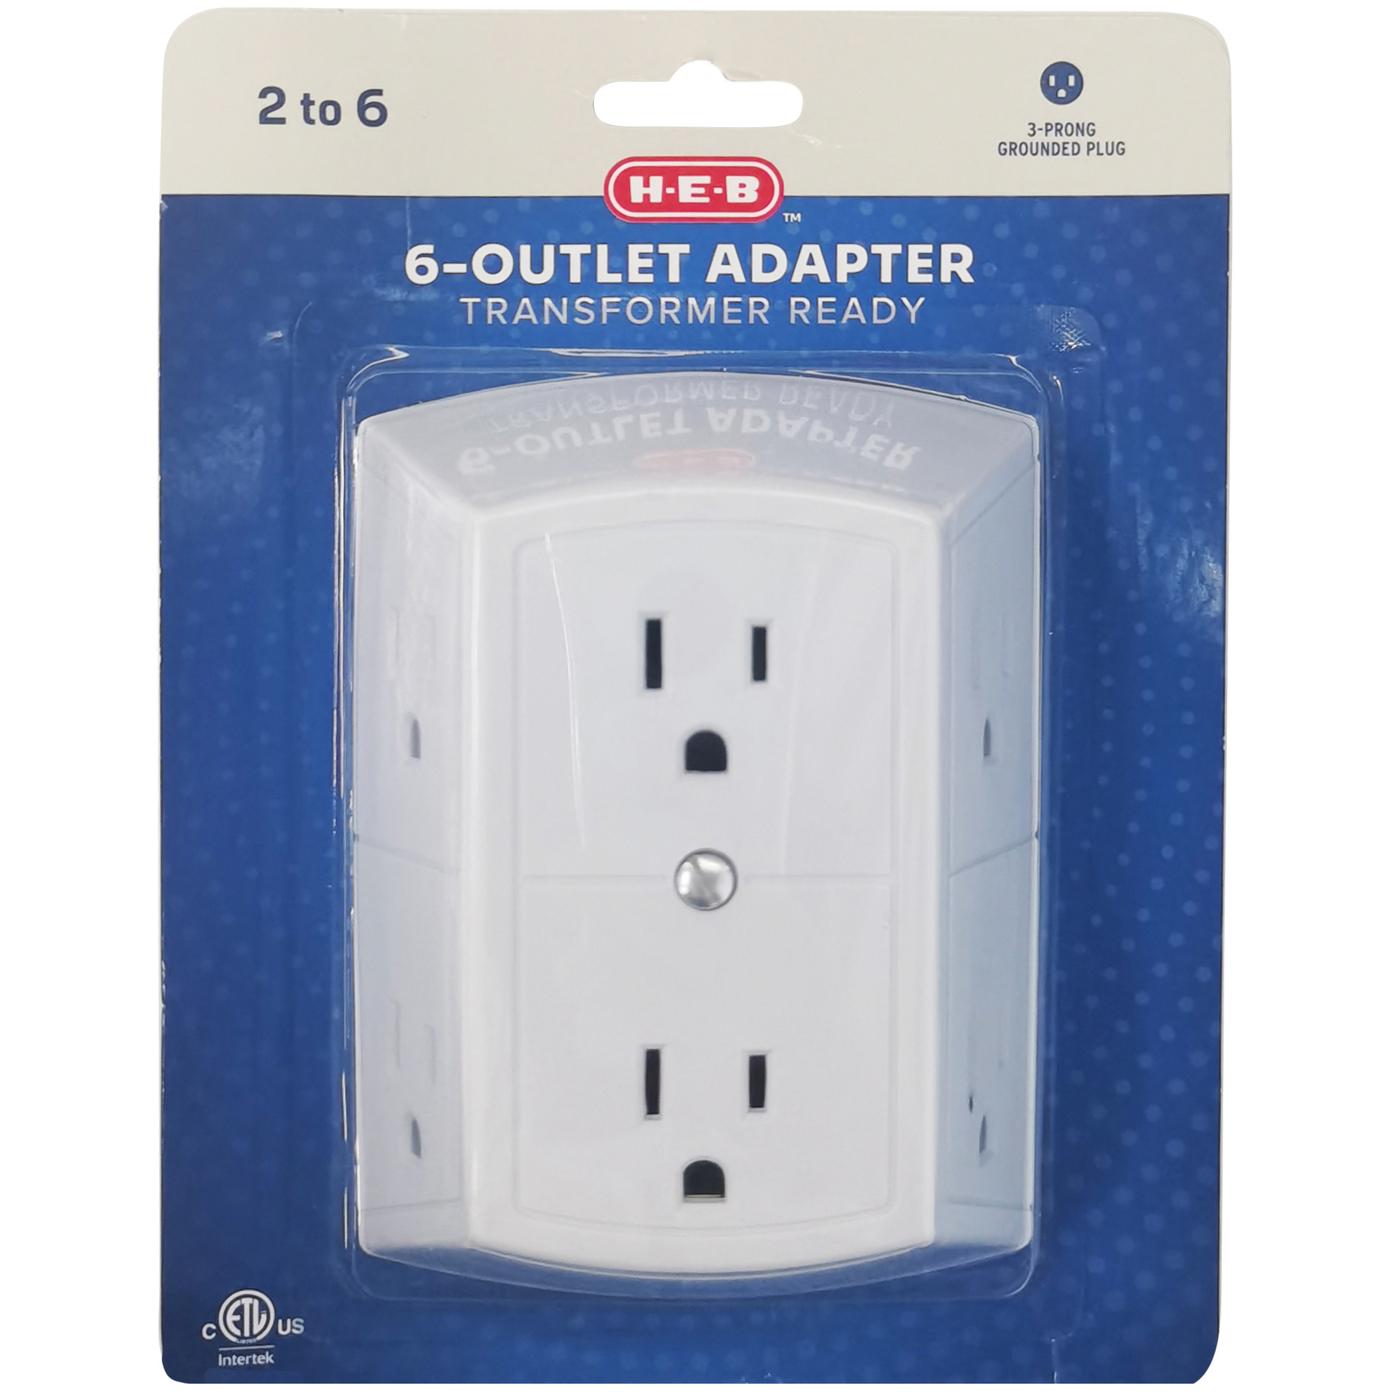 H-E-B 6-Outlet Adapter - White; image 1 of 2